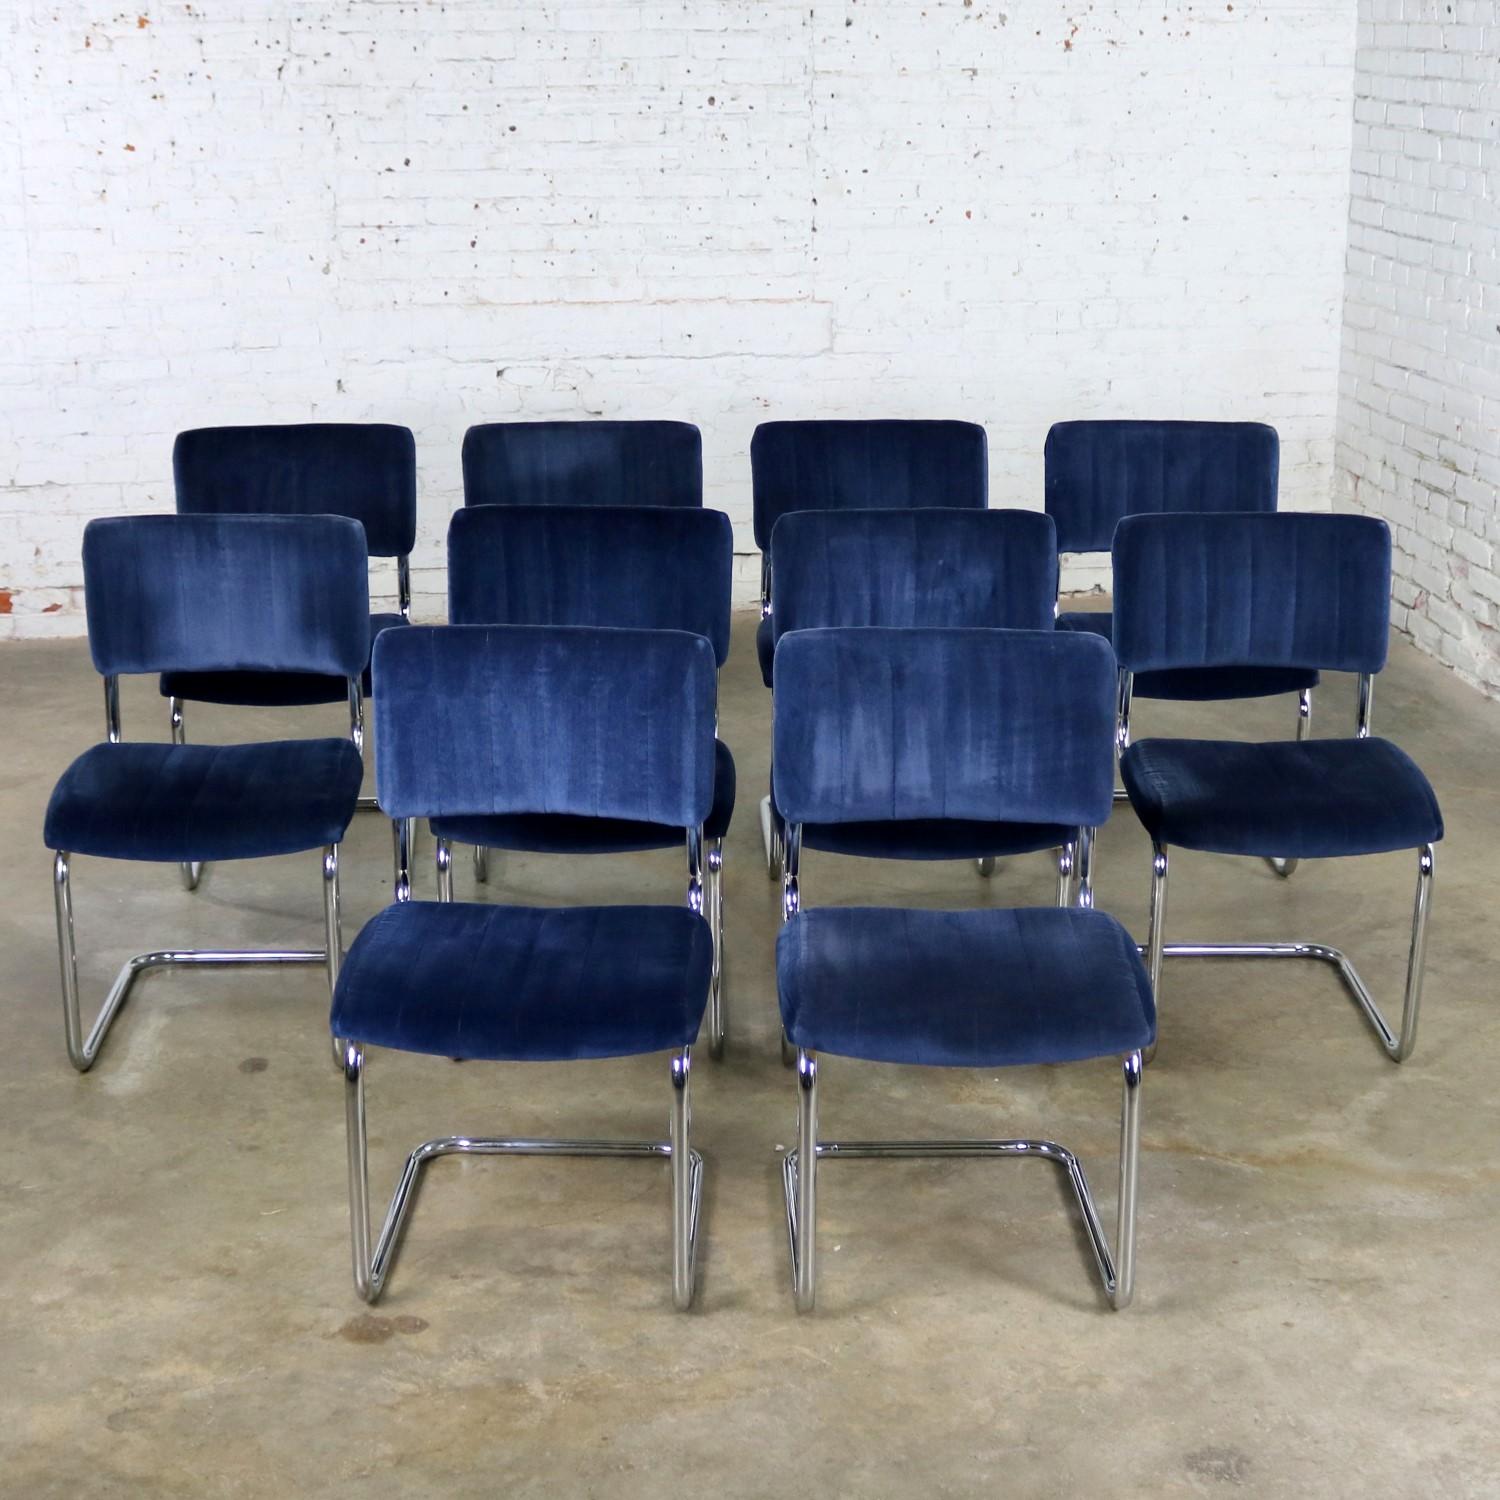 Wonderful set of ten cantilevered chrome and light blue velvet dining chairs after the Cesca chair designed by Marcel Breuer in 1928. This set is made by Segars Tubular Products and all ten of the chairs are in wonderful vintage condition with